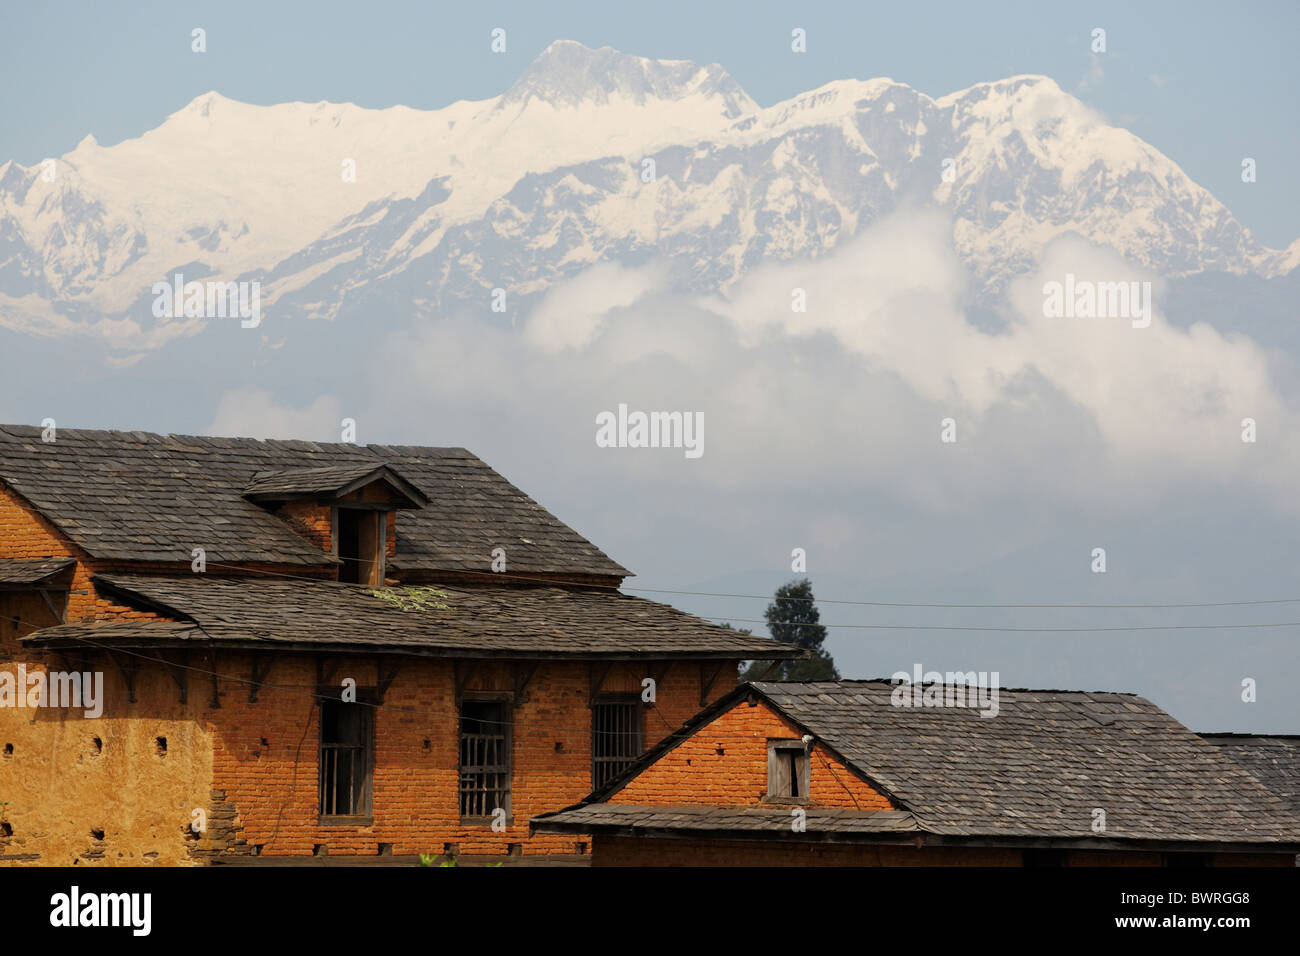 Rooftops and mountains in Bandipur, Nepal on Friday October 30, 2009. Stock Photo